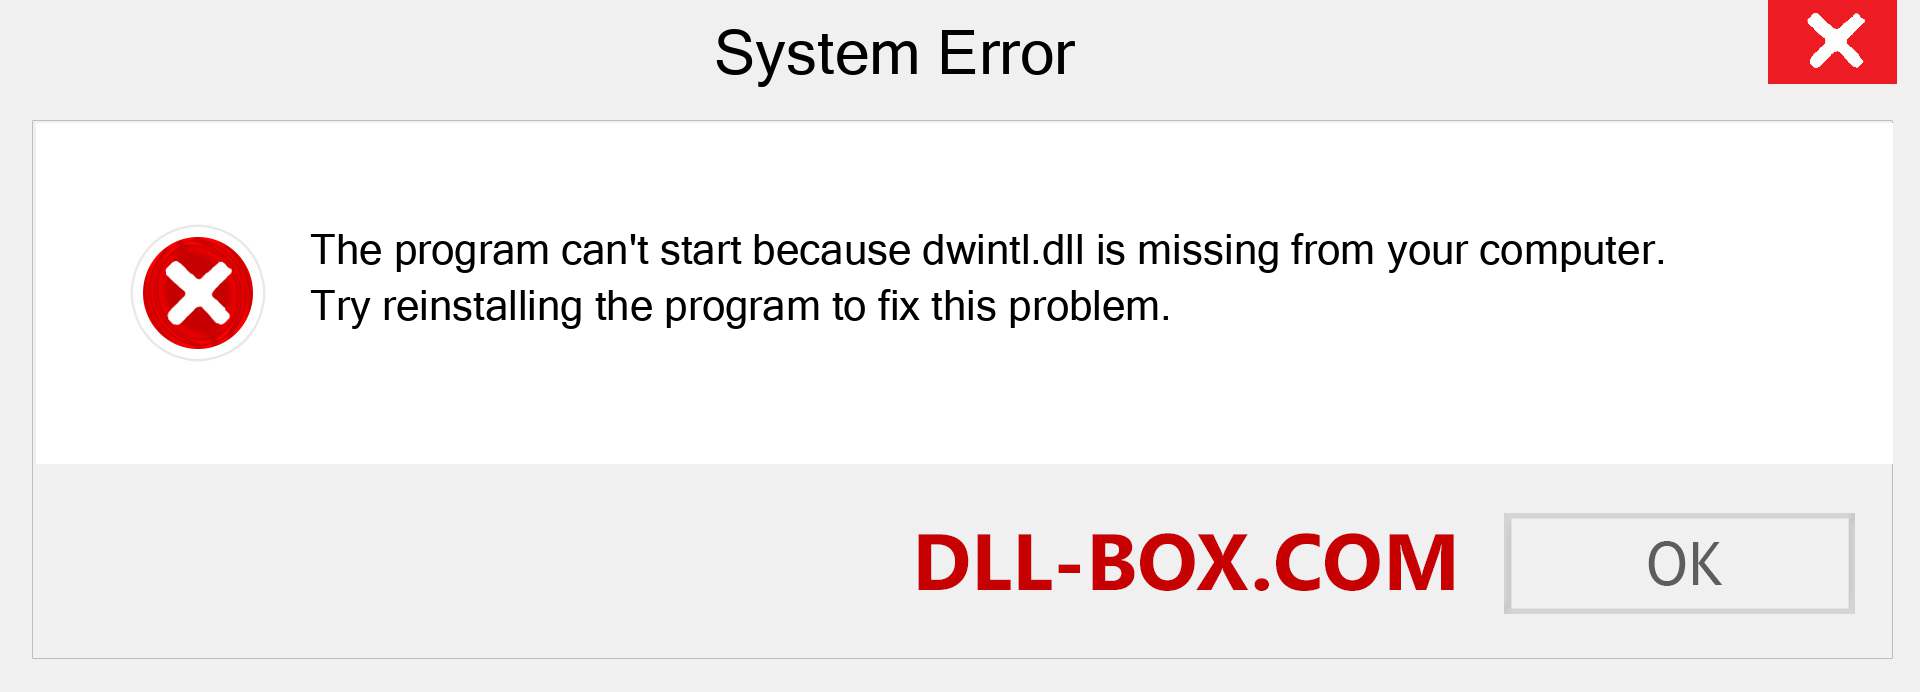  dwintl.dll file is missing?. Download for Windows 7, 8, 10 - Fix  dwintl dll Missing Error on Windows, photos, images